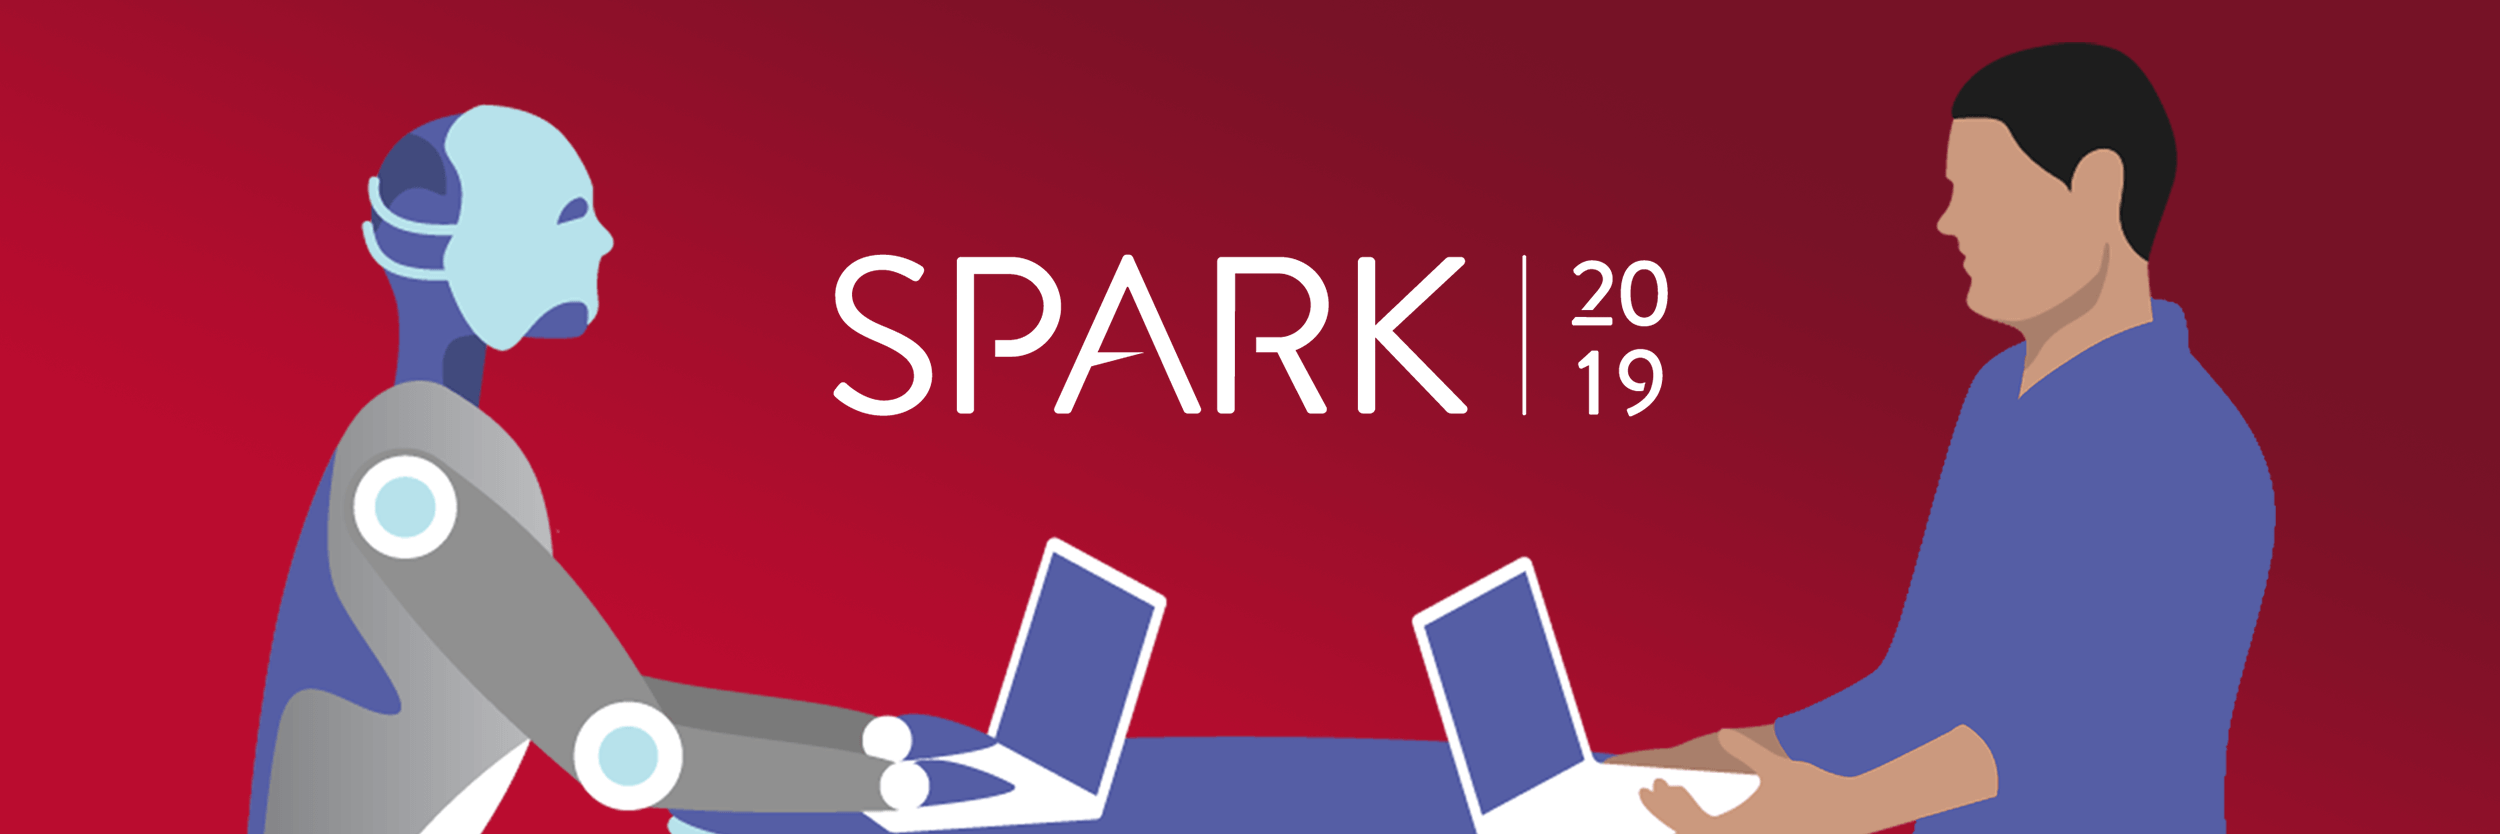 SPARK 2019 | The future of employee ideas